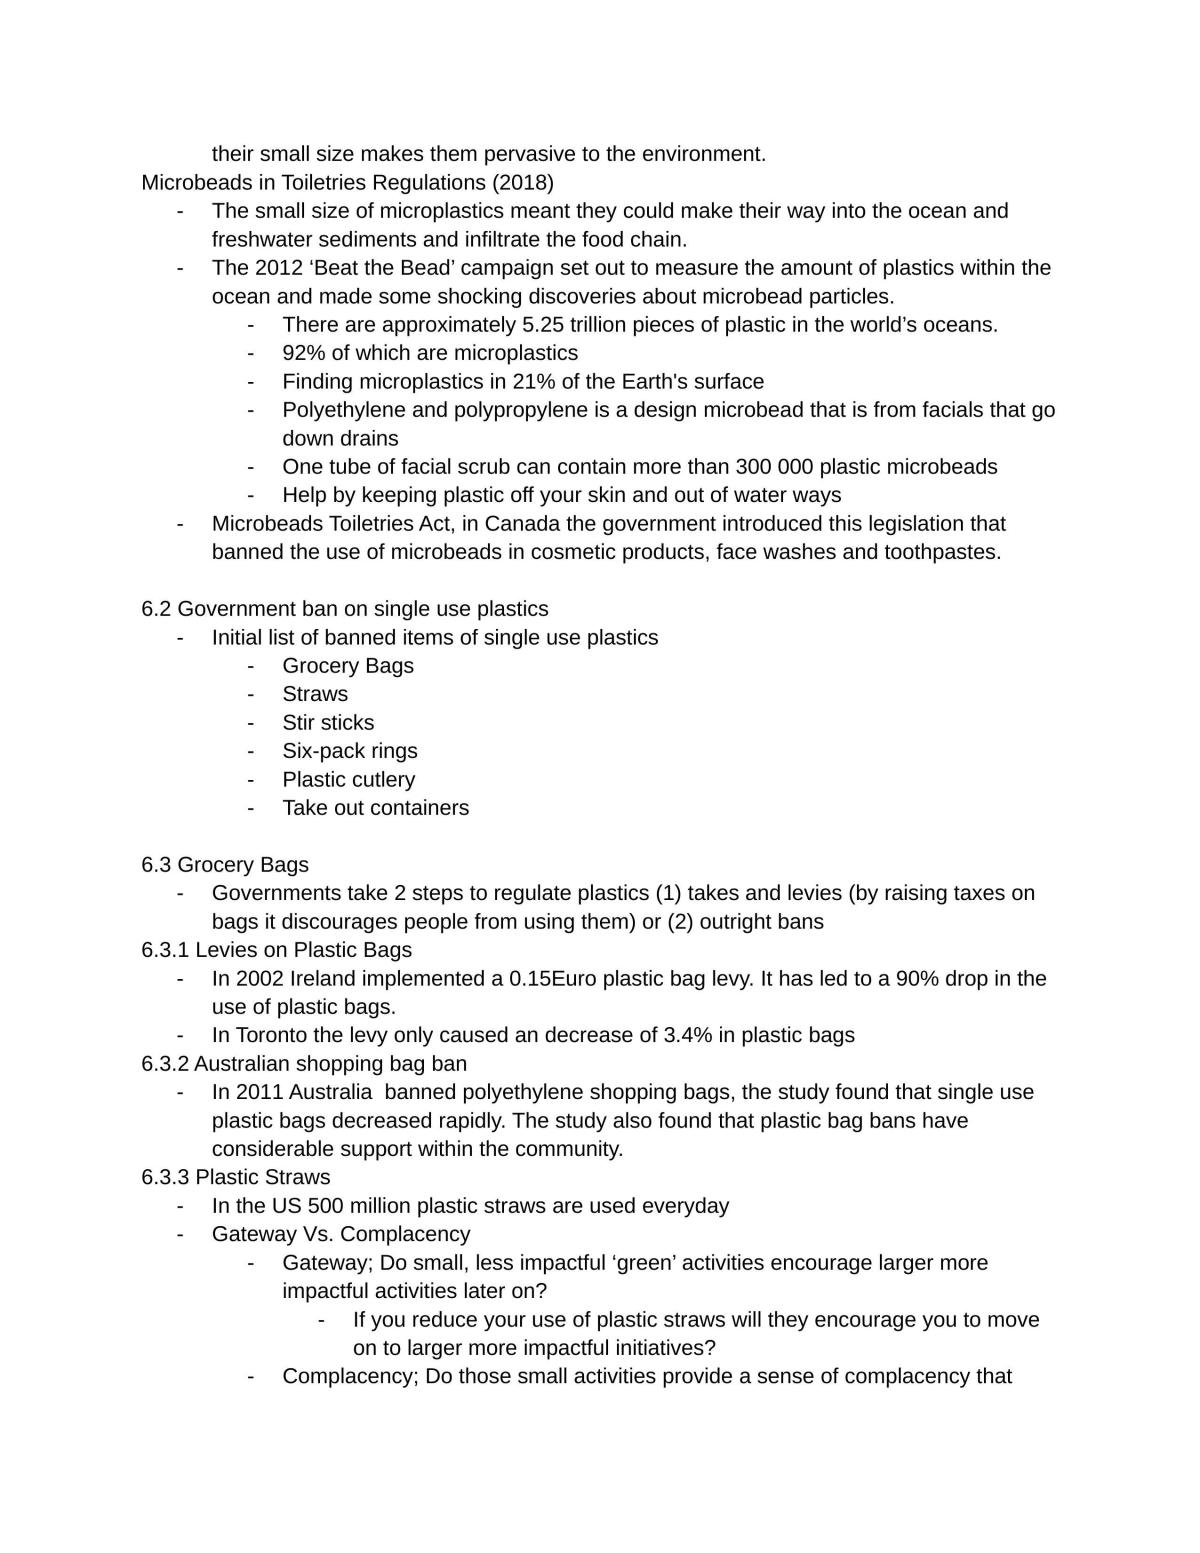 Complete Study Notes - ENVIROSCI 1021 - Page 19